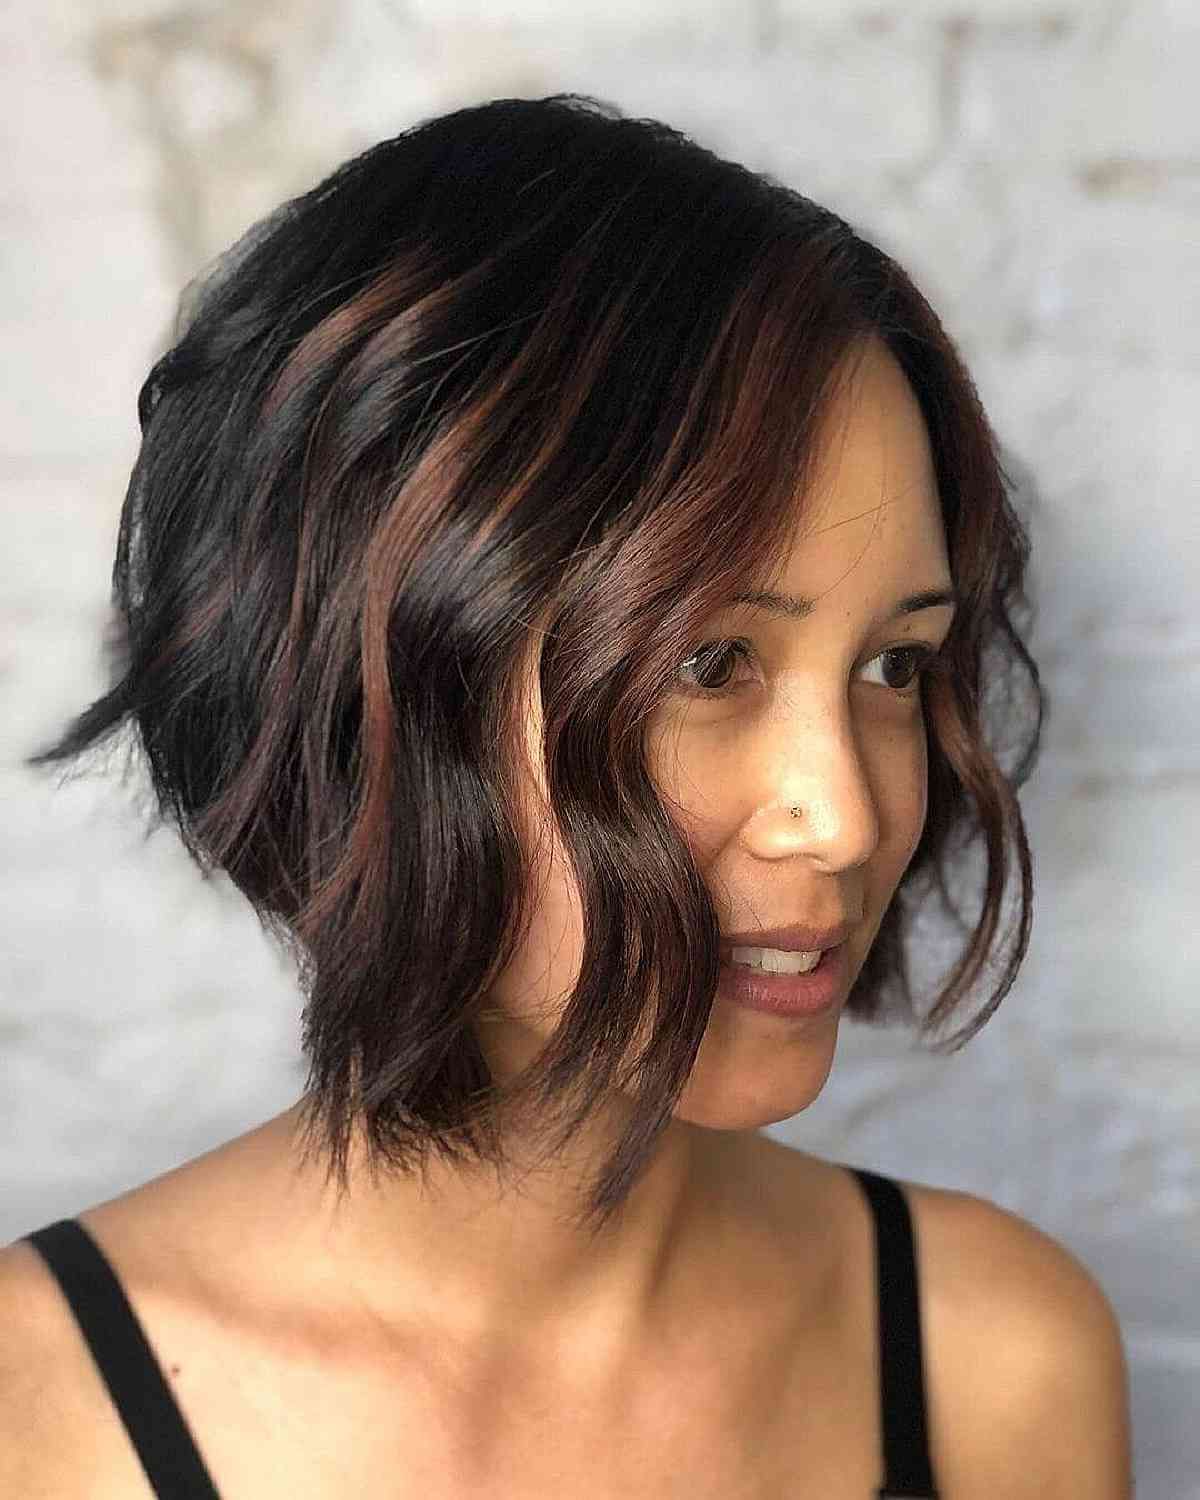 35 Fantastic Angled Bob Haircuts Women Don't Regret Getting With Regard To Angled Bob Short Hair Hairstyles (View 5 of 25)